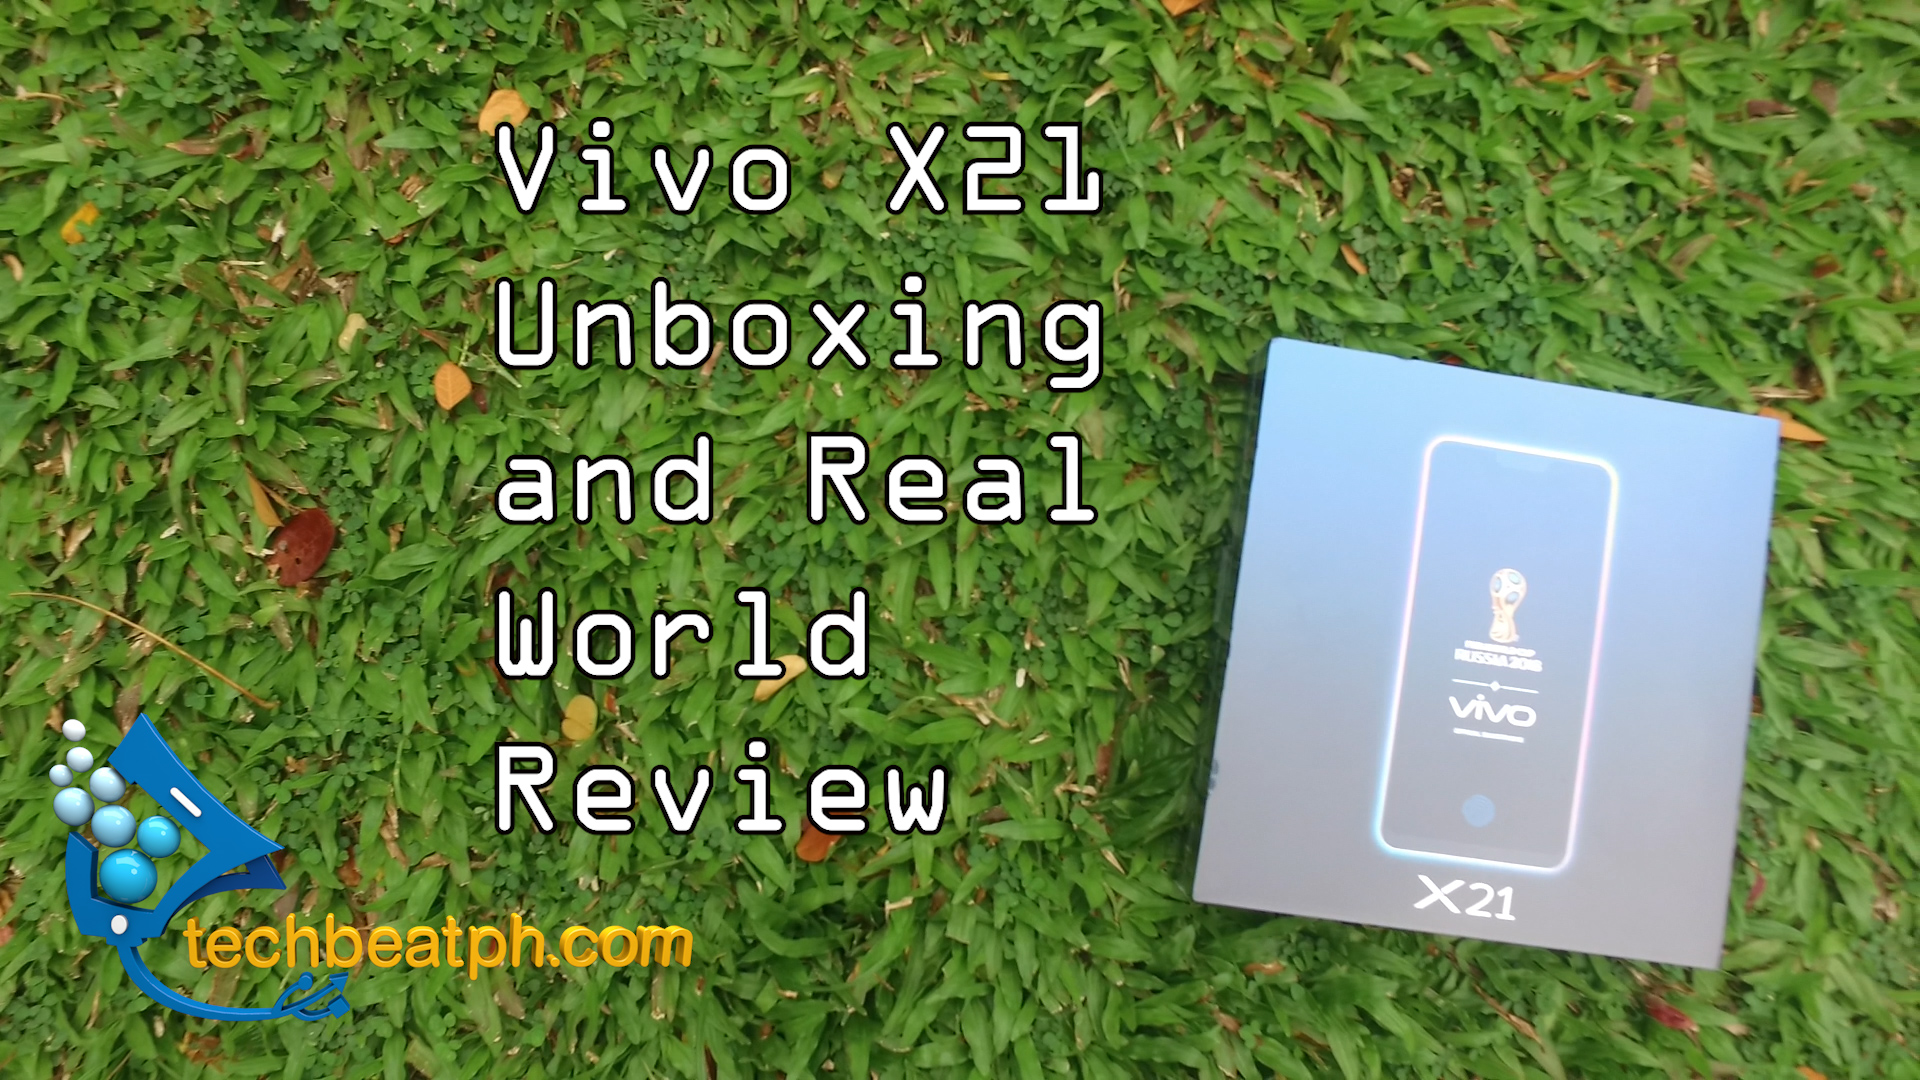 Vivo X21 Unboxing and Real World Review